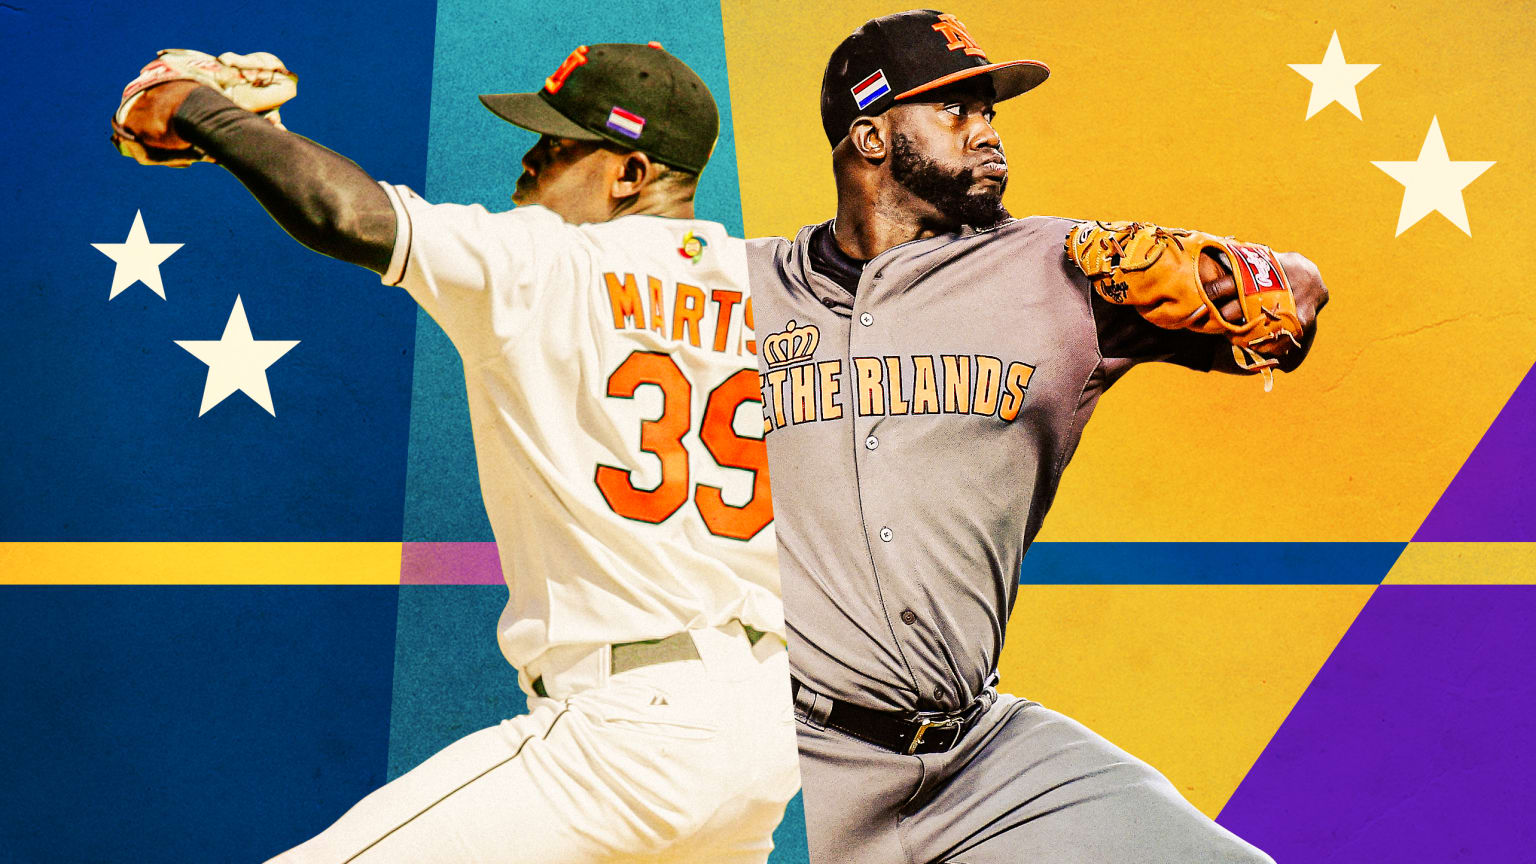 A photo illustration with split images of a pitcher in two different uniforms